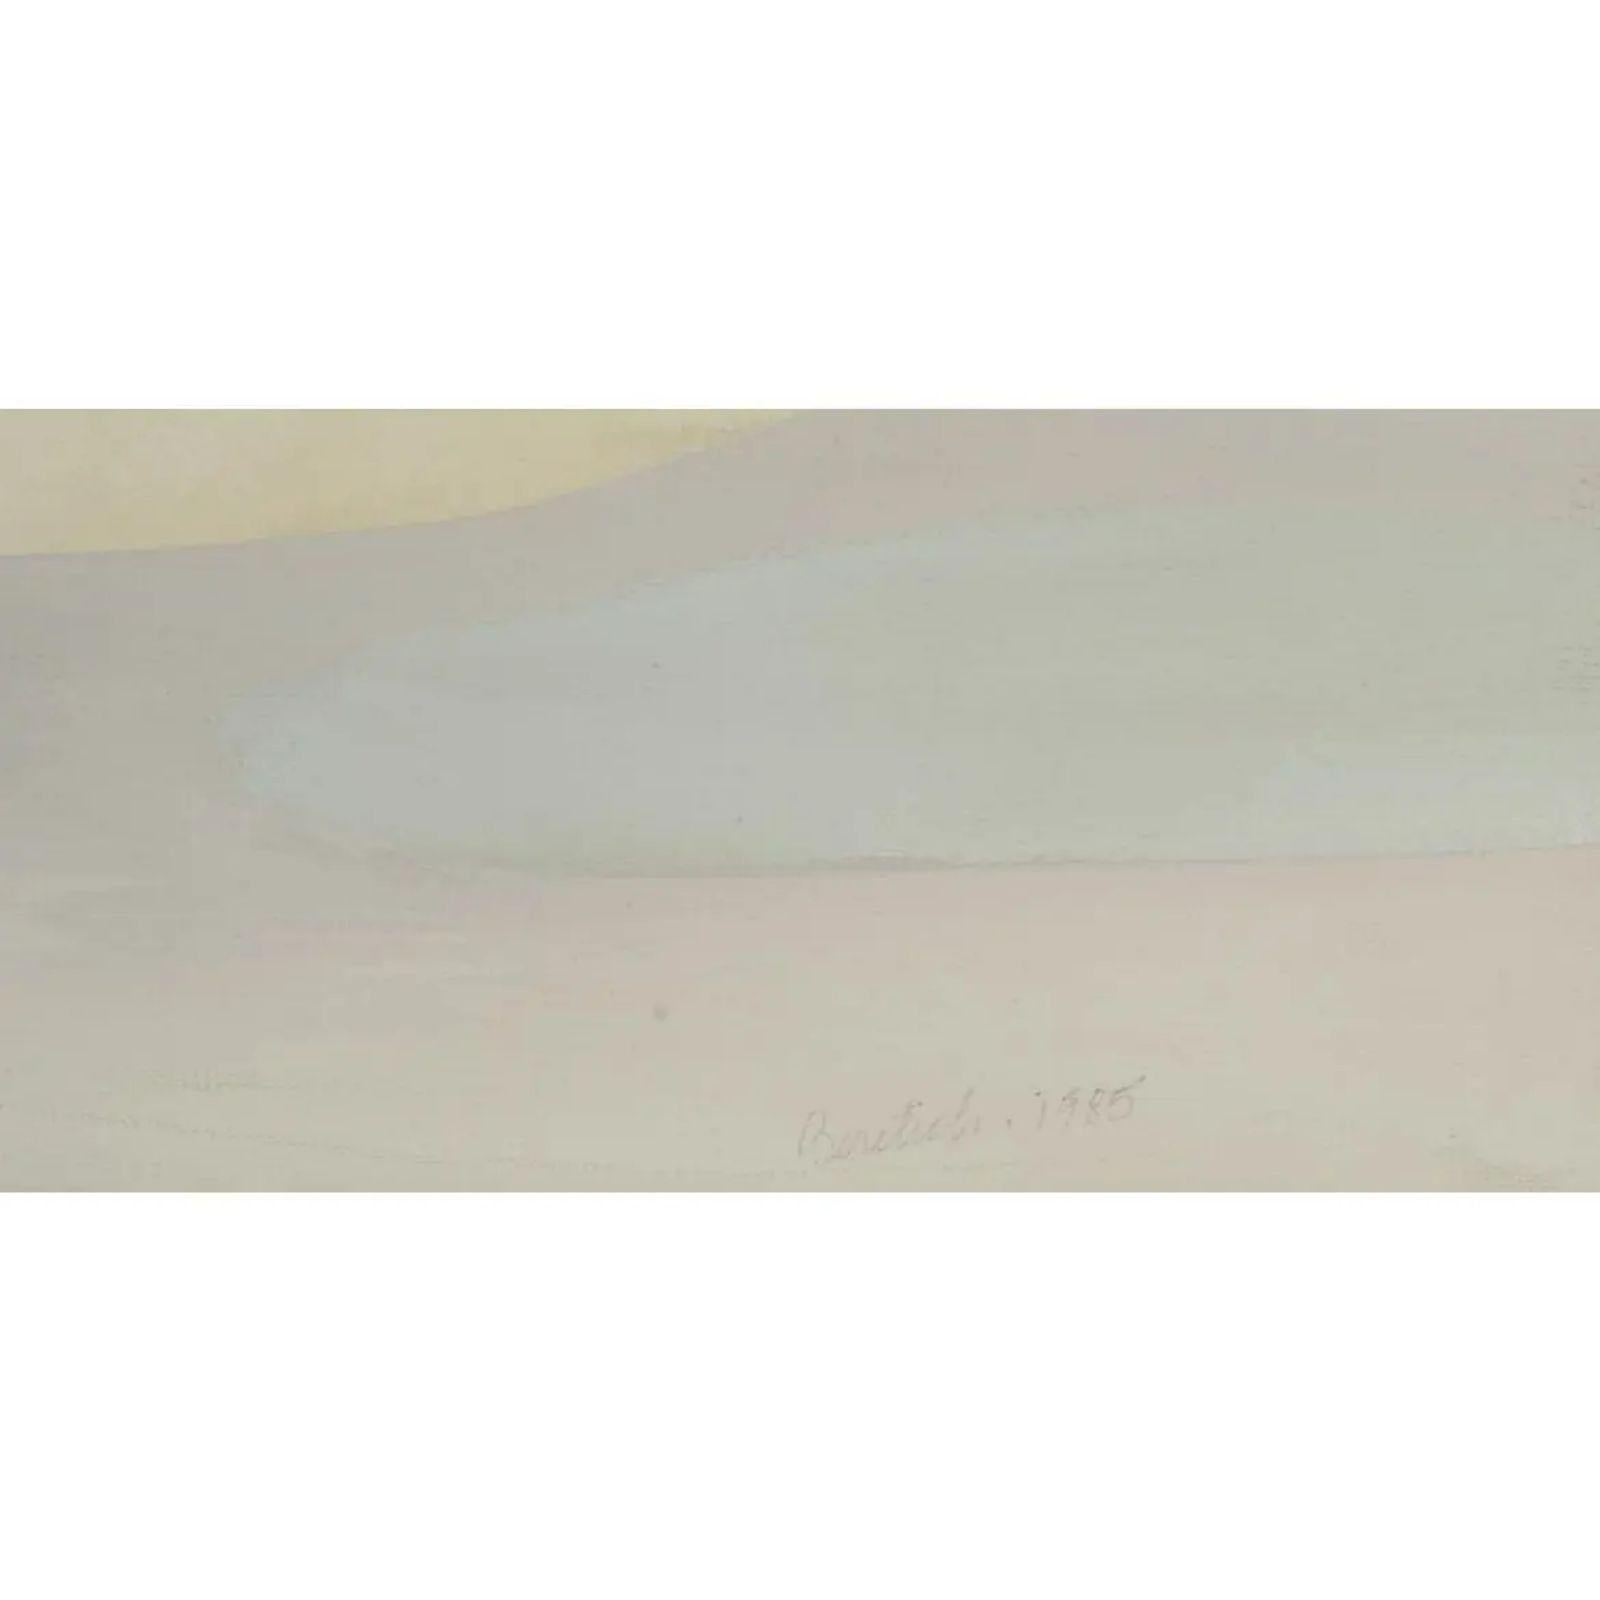 Abstract Painting by Barbara Beretich (1936-2018). It is entitled Silver Wide and depicts a moder abstract landscape. It is artist signed and was painted in 1985.

Additional information: 
Materials: Canvas, Oil Paint
Color: Silver
Period: